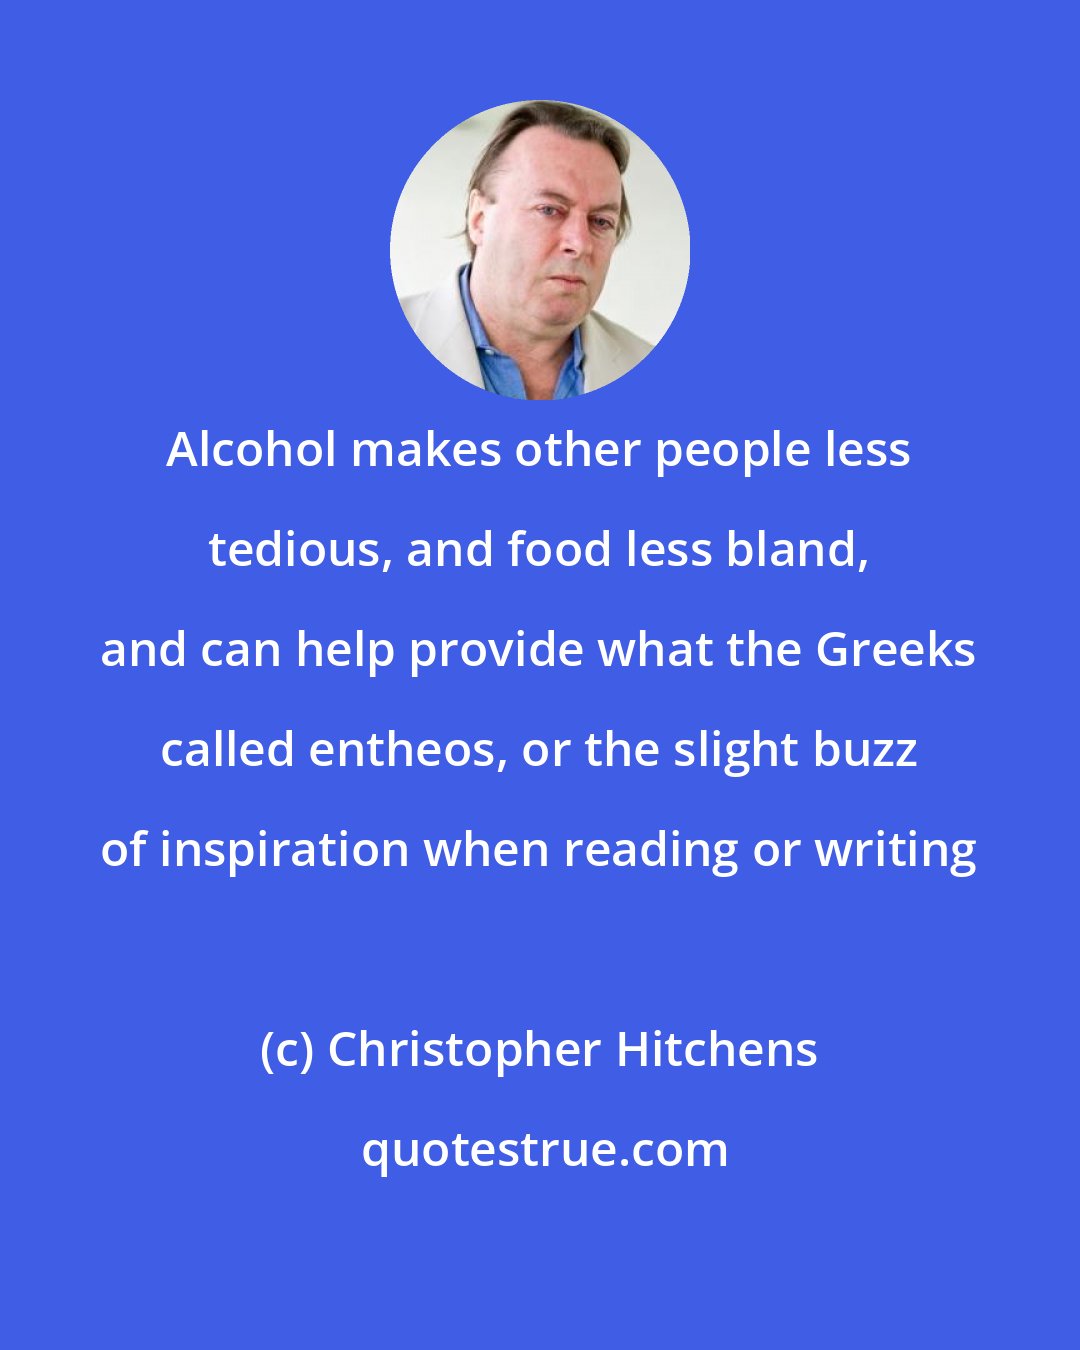 Christopher Hitchens: Alcohol makes other people less tedious, and food less bland, and can help provide what the Greeks called entheos, or the slight buzz of inspiration when reading or writing